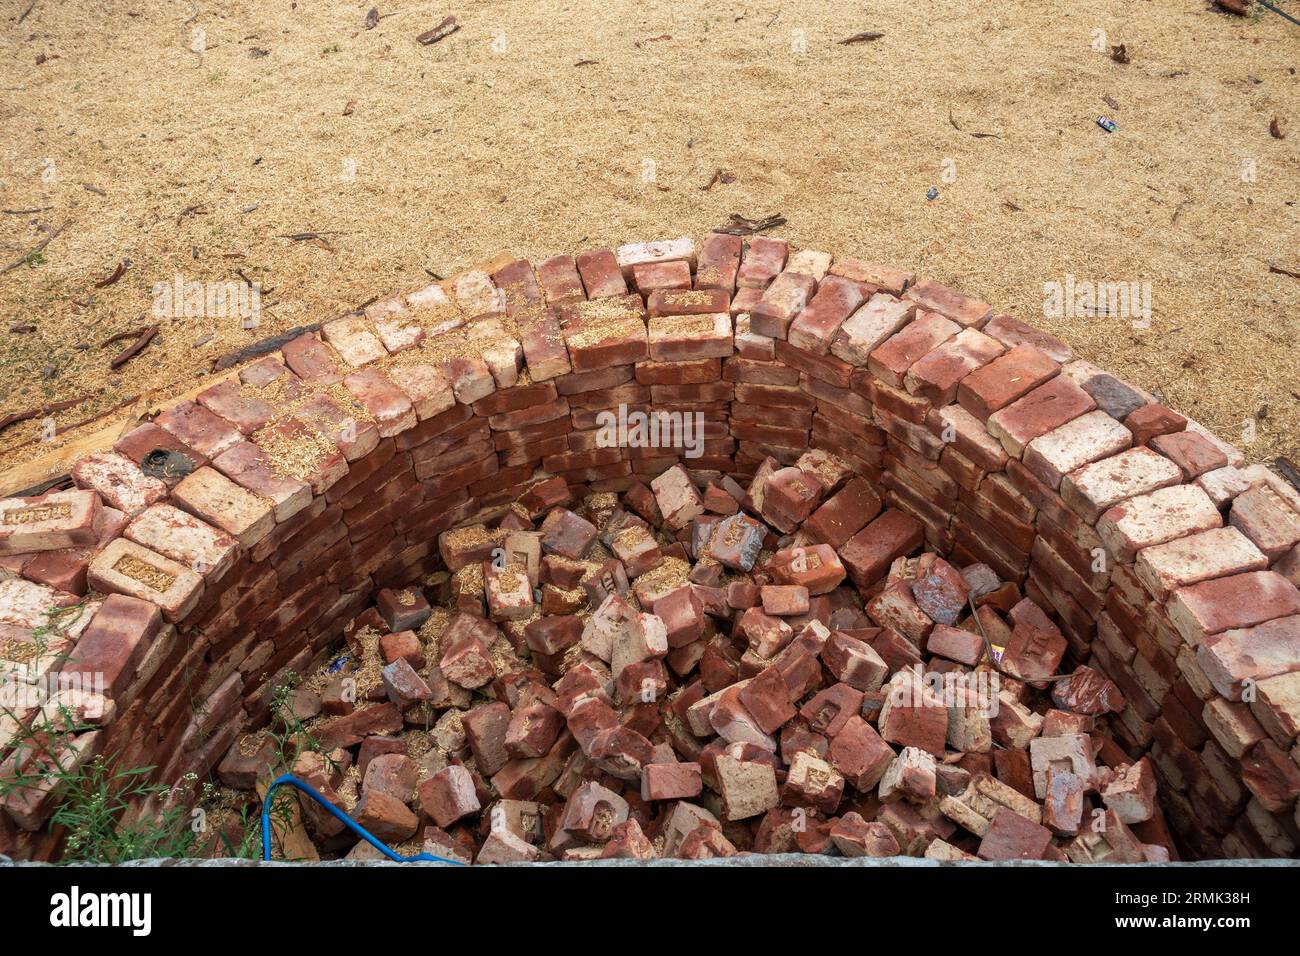 Building compact brick water harvesting tanks in rural Uttarakhand, India, for sustainable water conservation. Stock Photo